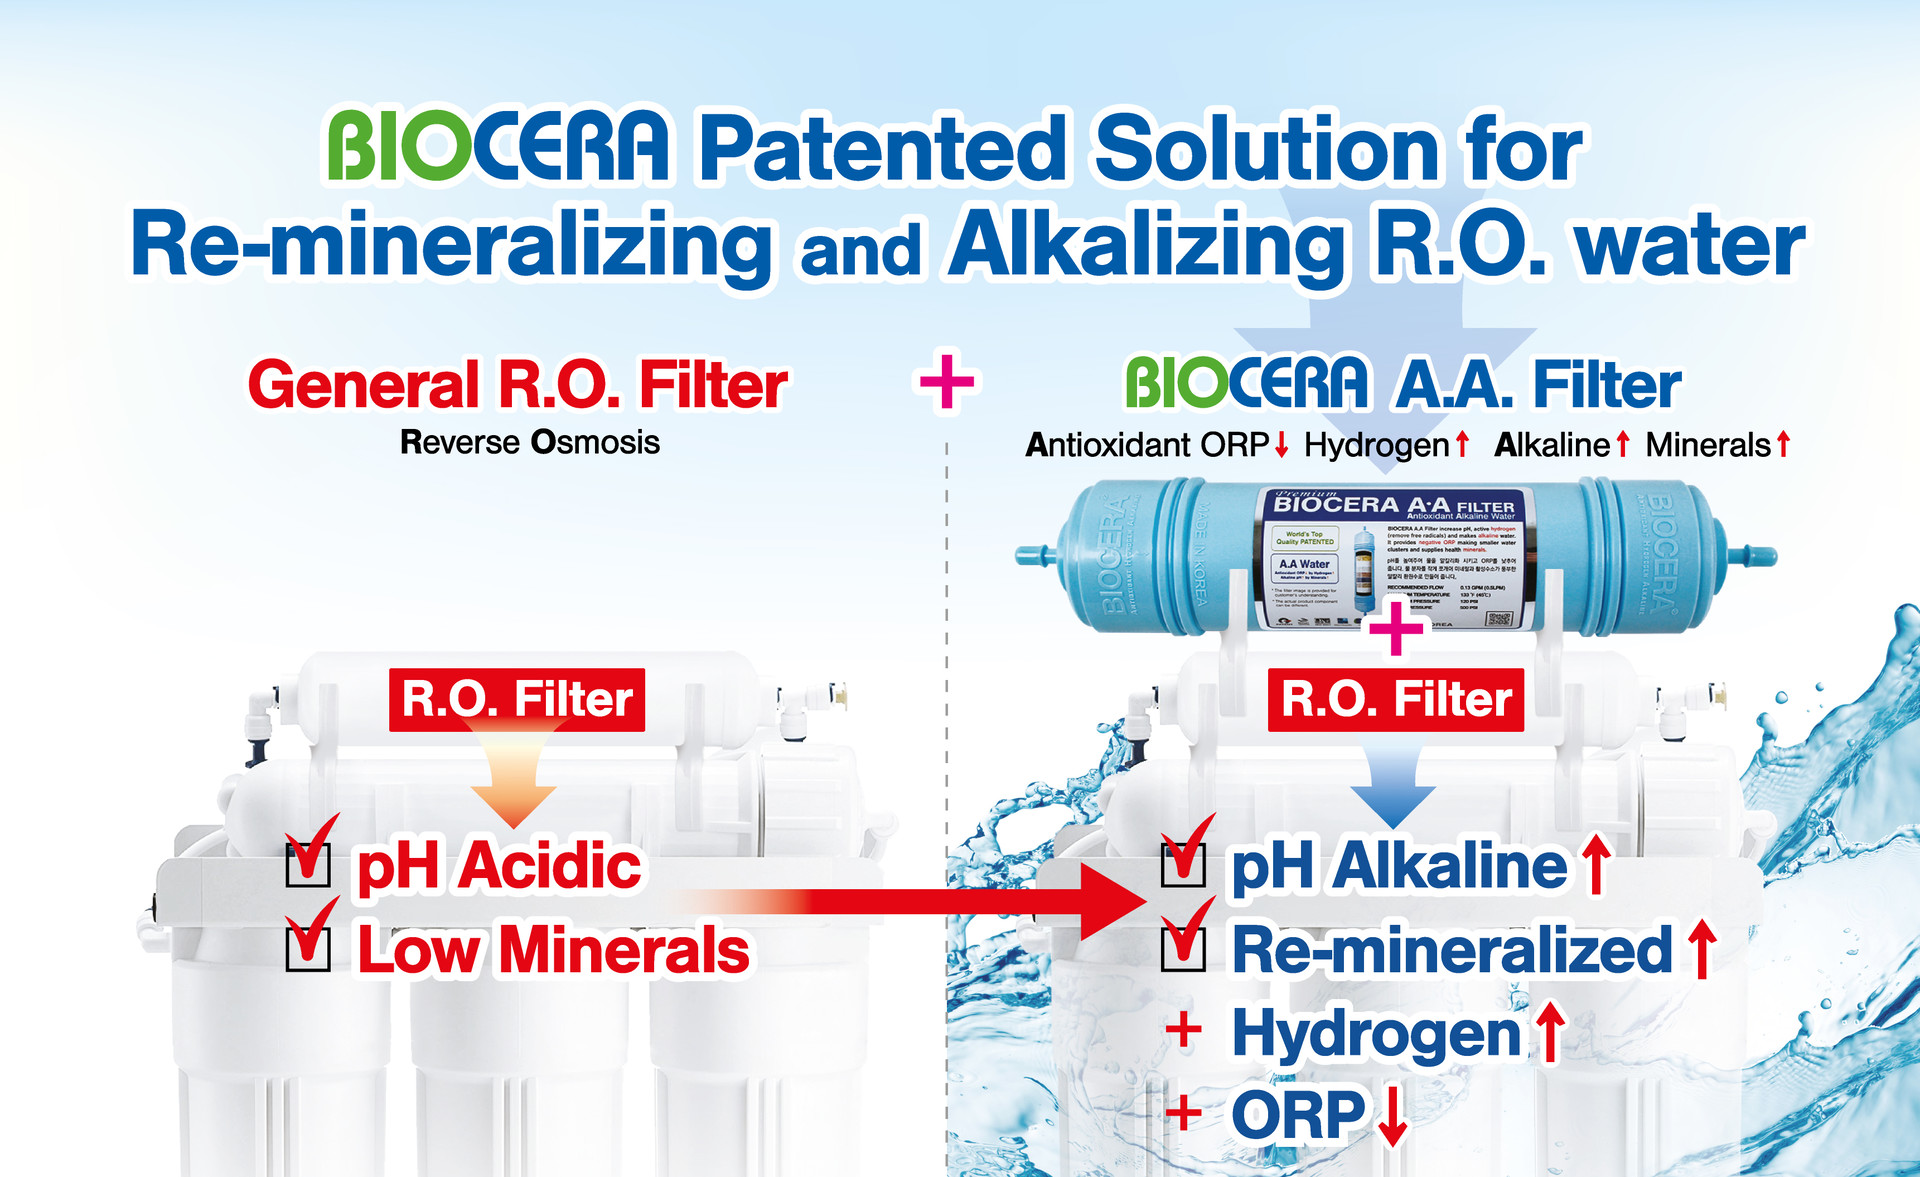 Biocera patent solution after ro